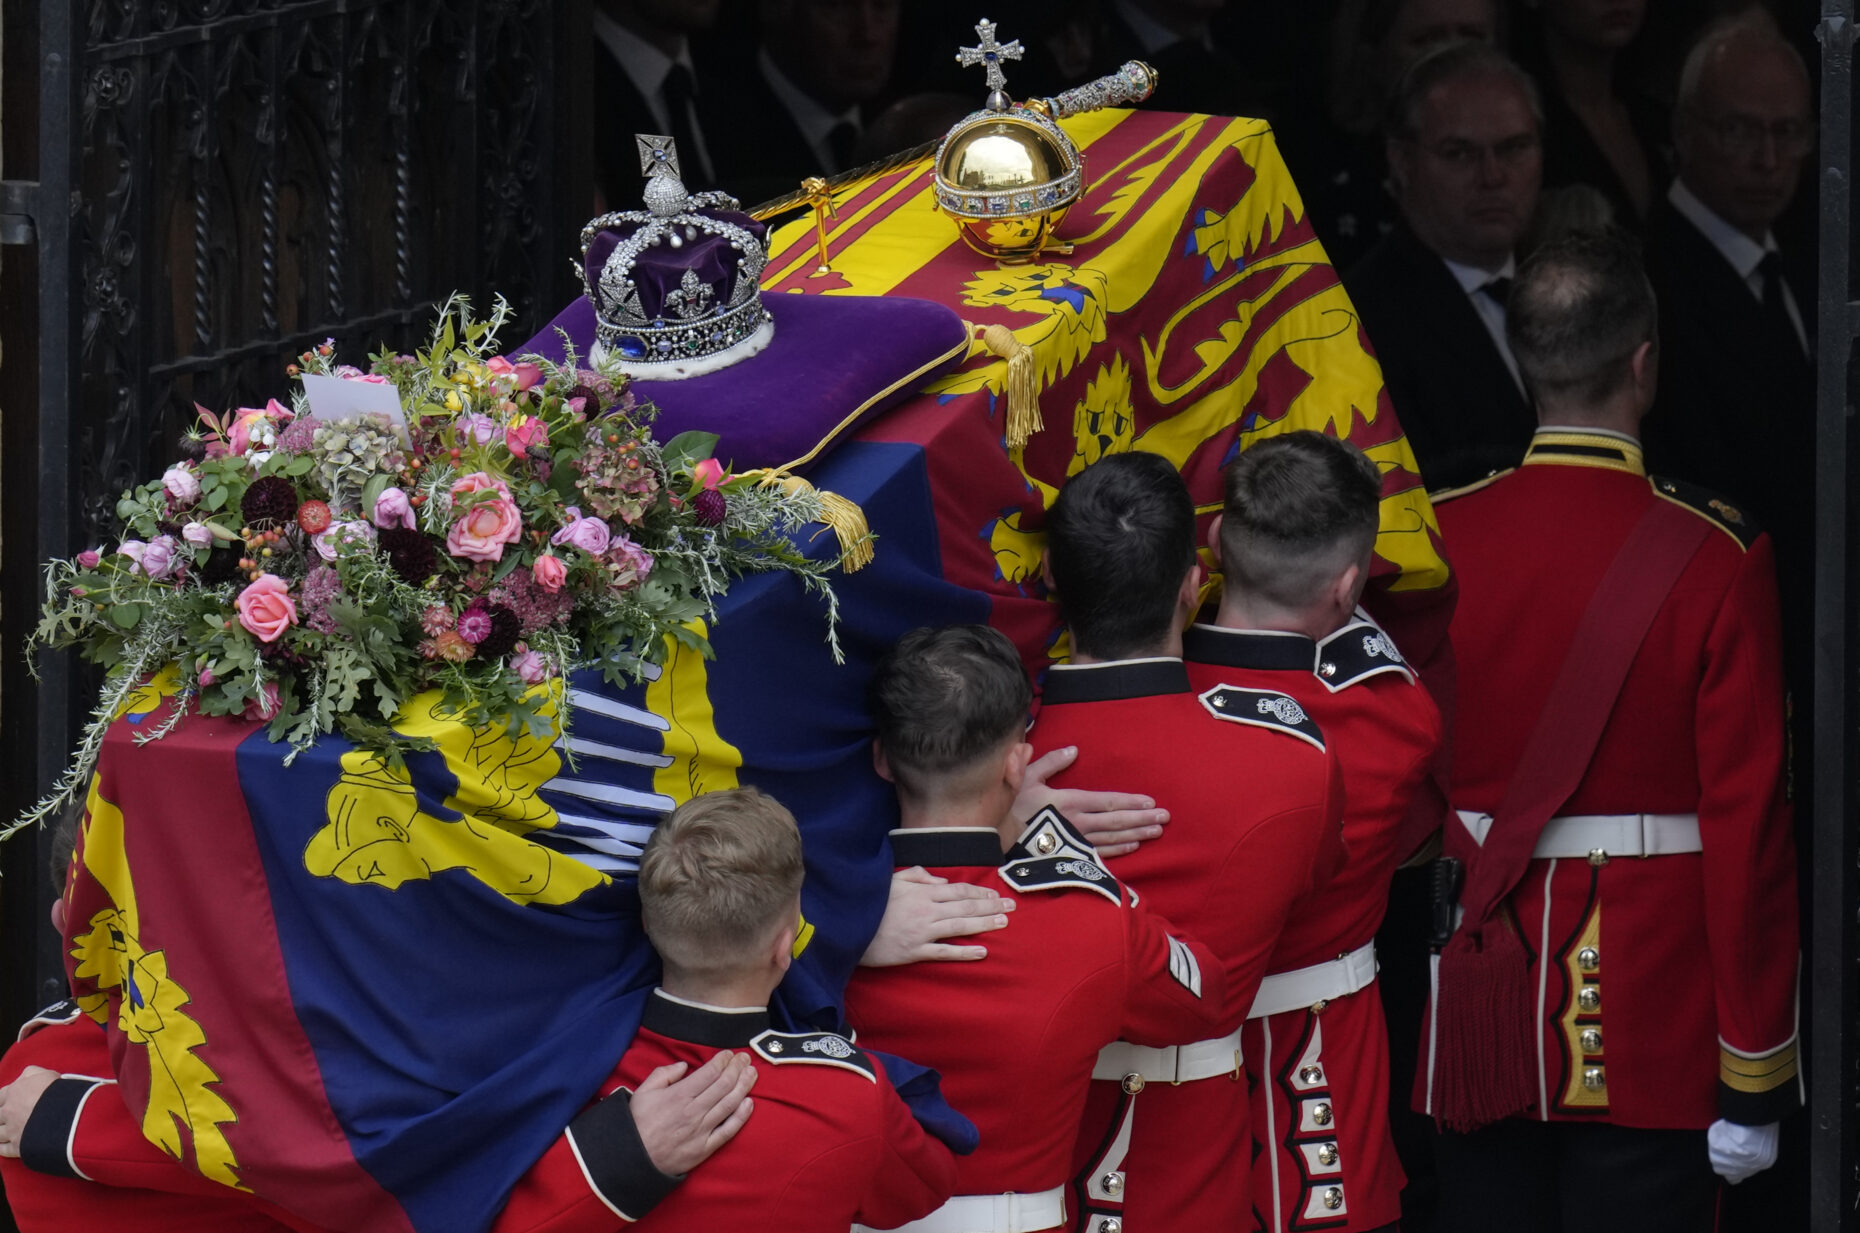 Military personnel in red ceremonial uniforms carrying a coffin adorned with flowers and a crown at the state funeral of queen elizabeth ii